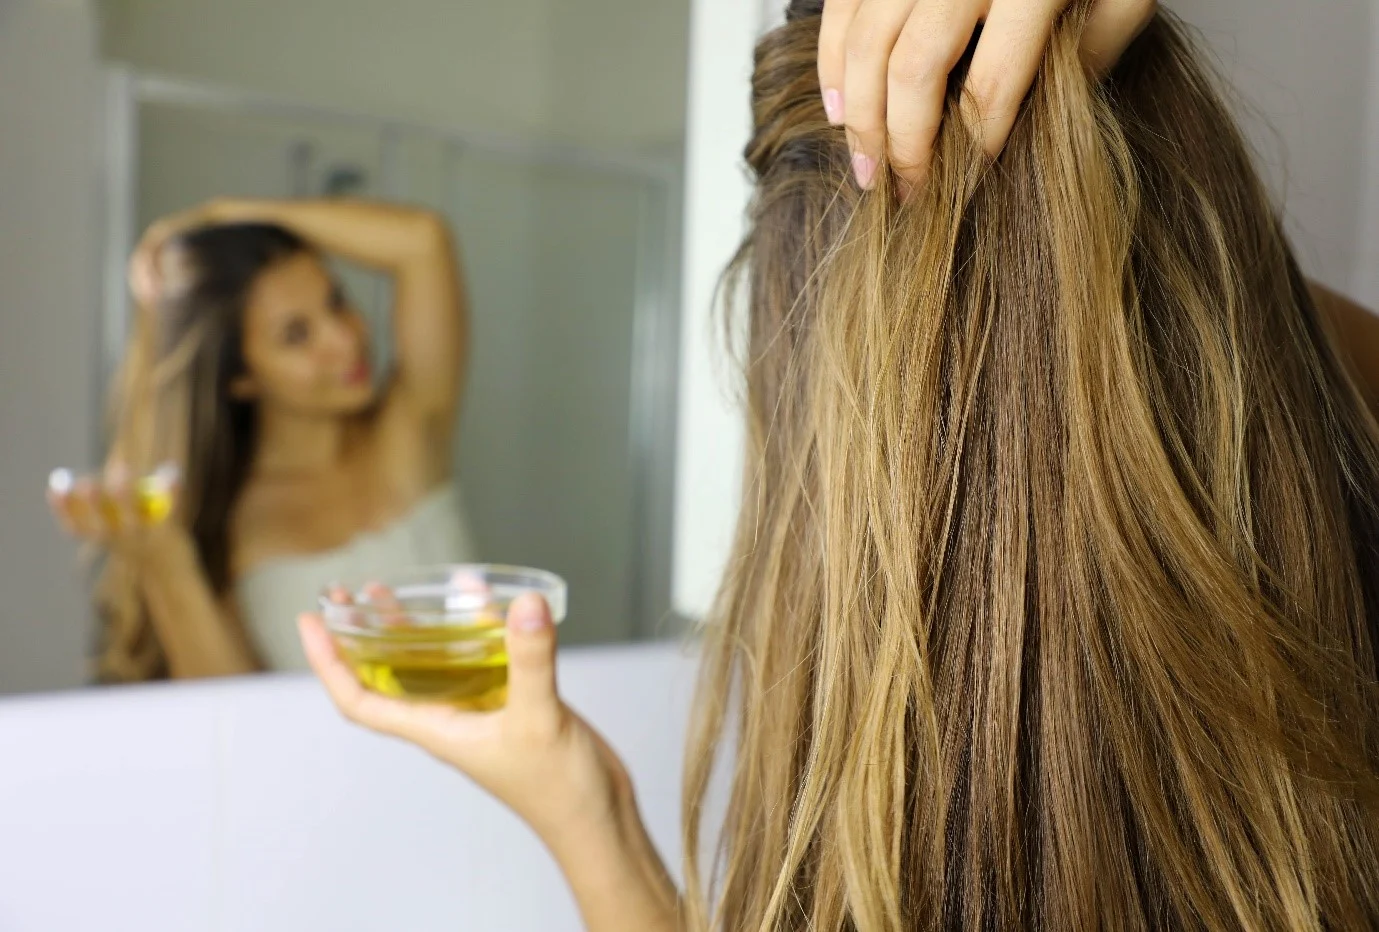 Itchy Scalp and Oil: Why Does my Scalp Itch after Applying Oil? | H&S India